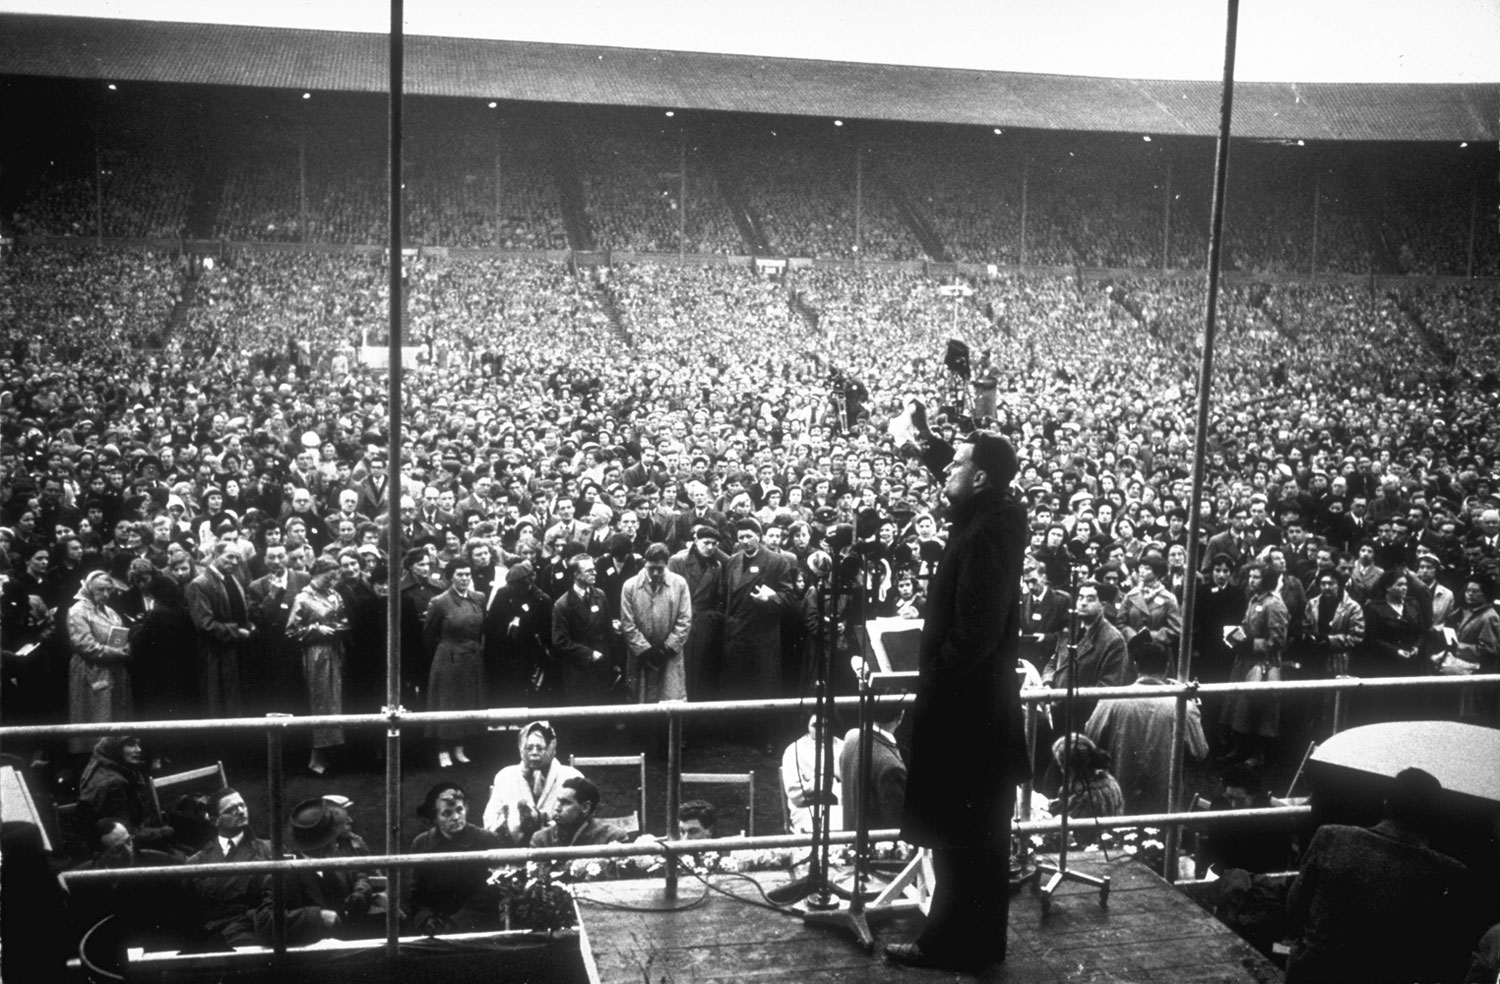 Graham waves a handkerchief while standing at a podium during a service in front of a crowd at Wembley Stadium. (Brian Seed—Time &amp; Life Pictures/Getty Images)